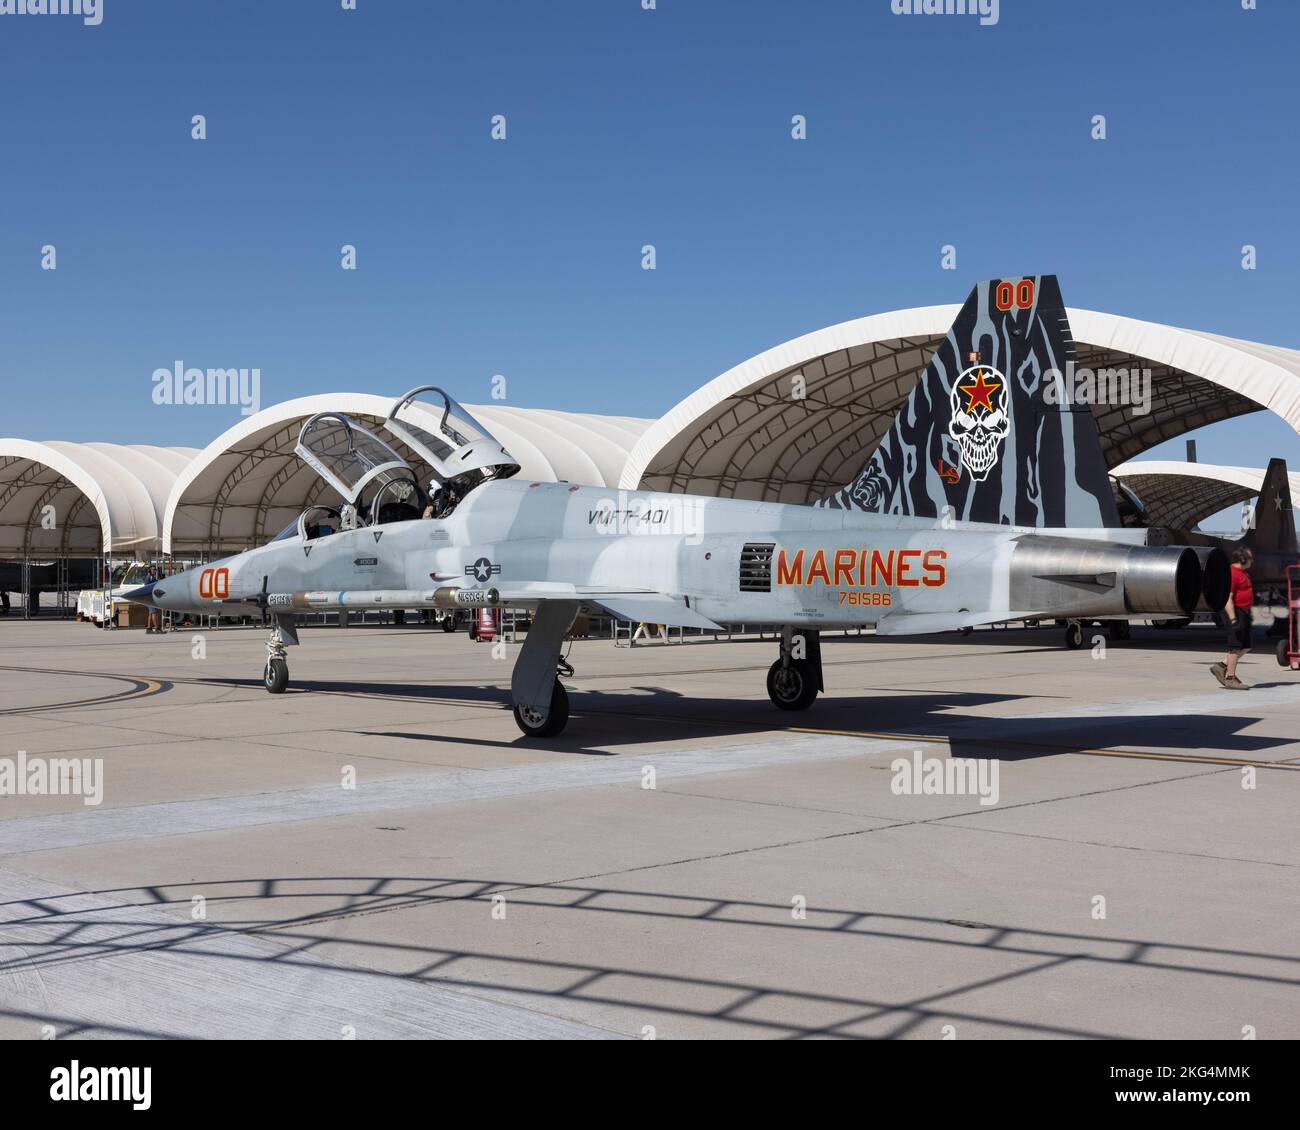 U.S. Marine Corps Lt. Col. Eric Scherrer, commanding officer, Marine Fighter Training Squadron 401 (VMFT-401), Marine Aircraft Group 41, 4th Marine Aircraft Wing, pilots an F-5N Tiger II at Marine Corps Air Station Yuma, Arizona, Oct. 28, 2022. VMFT-401 is the only adversary squadron with the mission to act as the opposing force in simulated air combat. Stock Photo